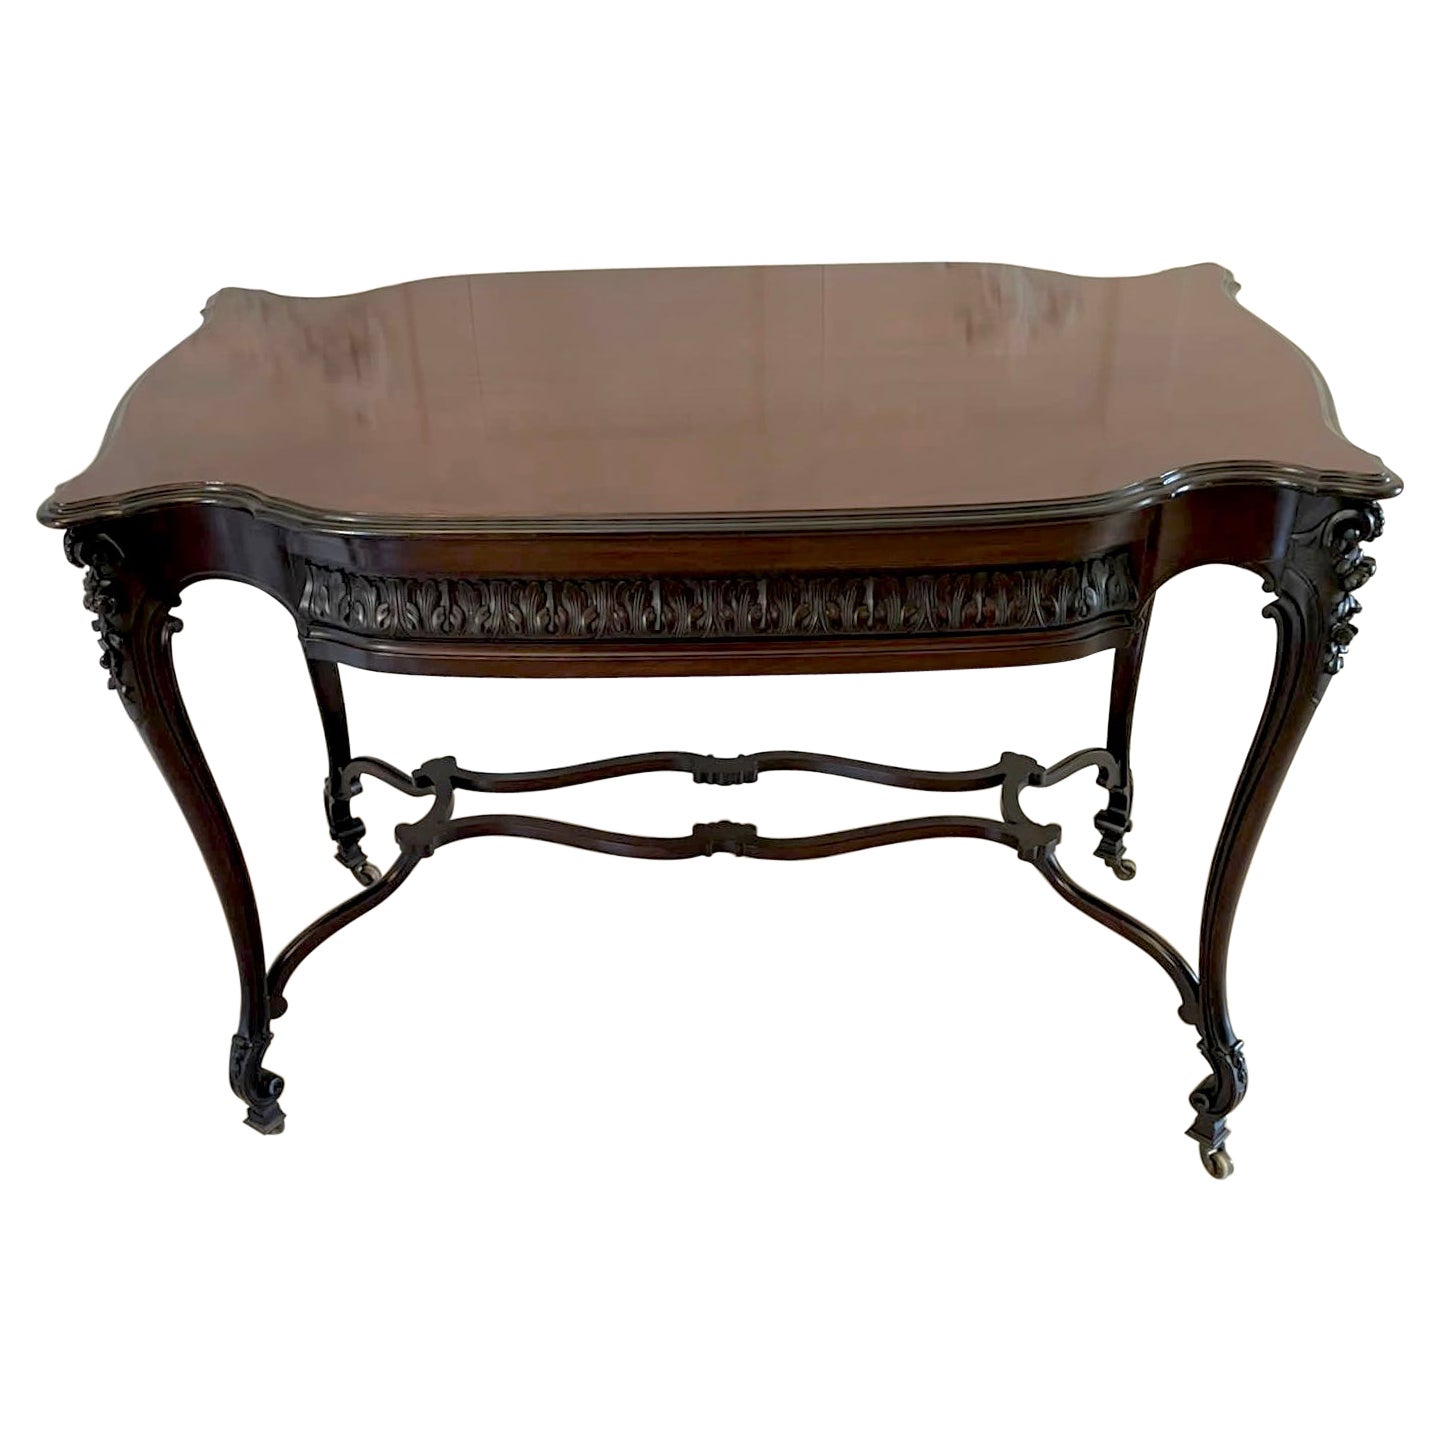  Outstanding Quality Antique Victorian Carved Mahogany Freestanding Centre Table For Sale